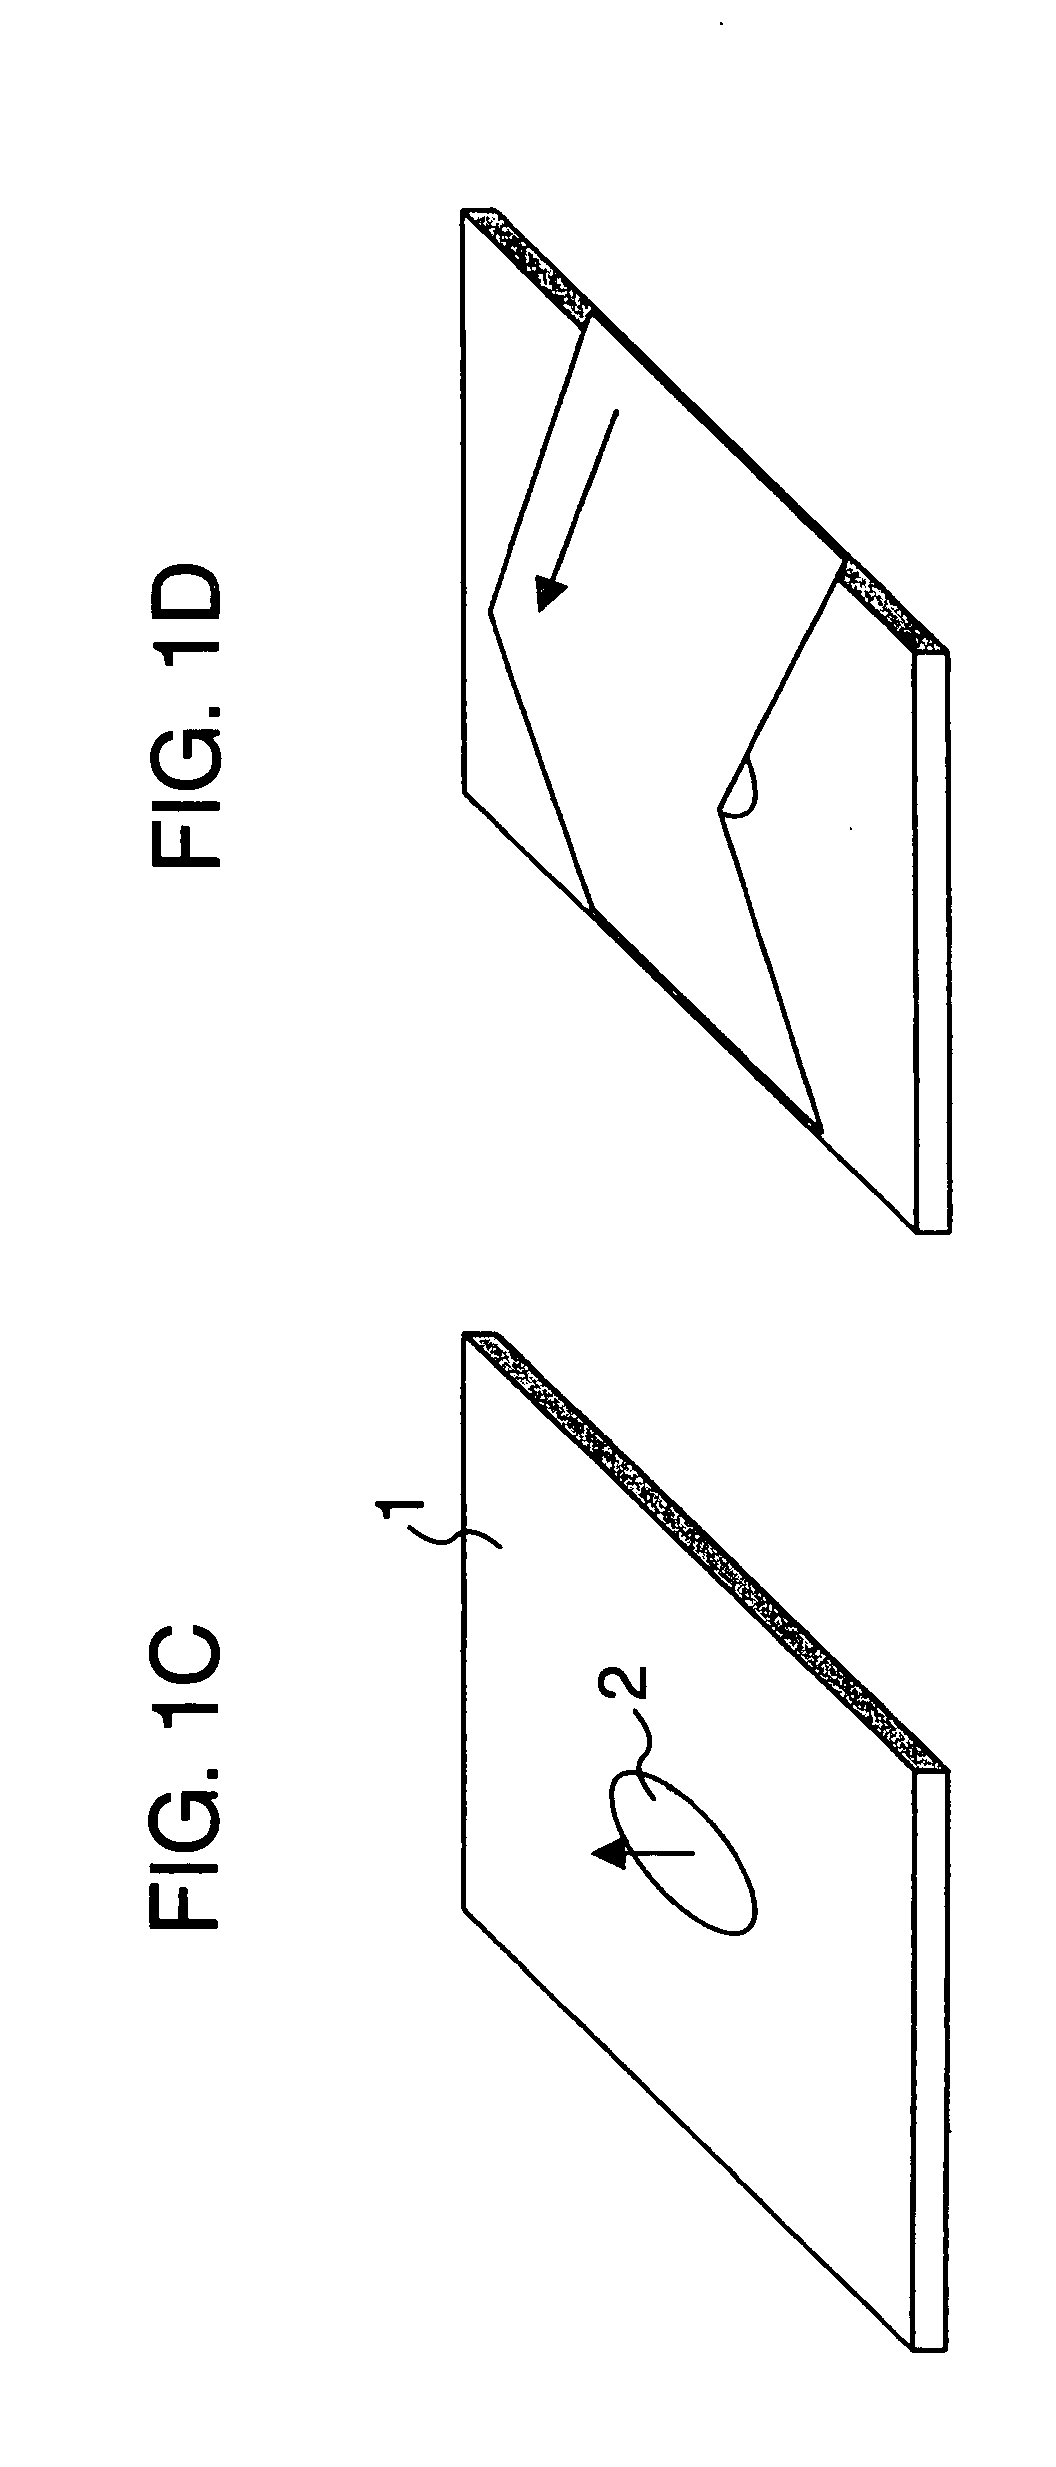 Polyolefin microporous membrane and method of evaluating the same